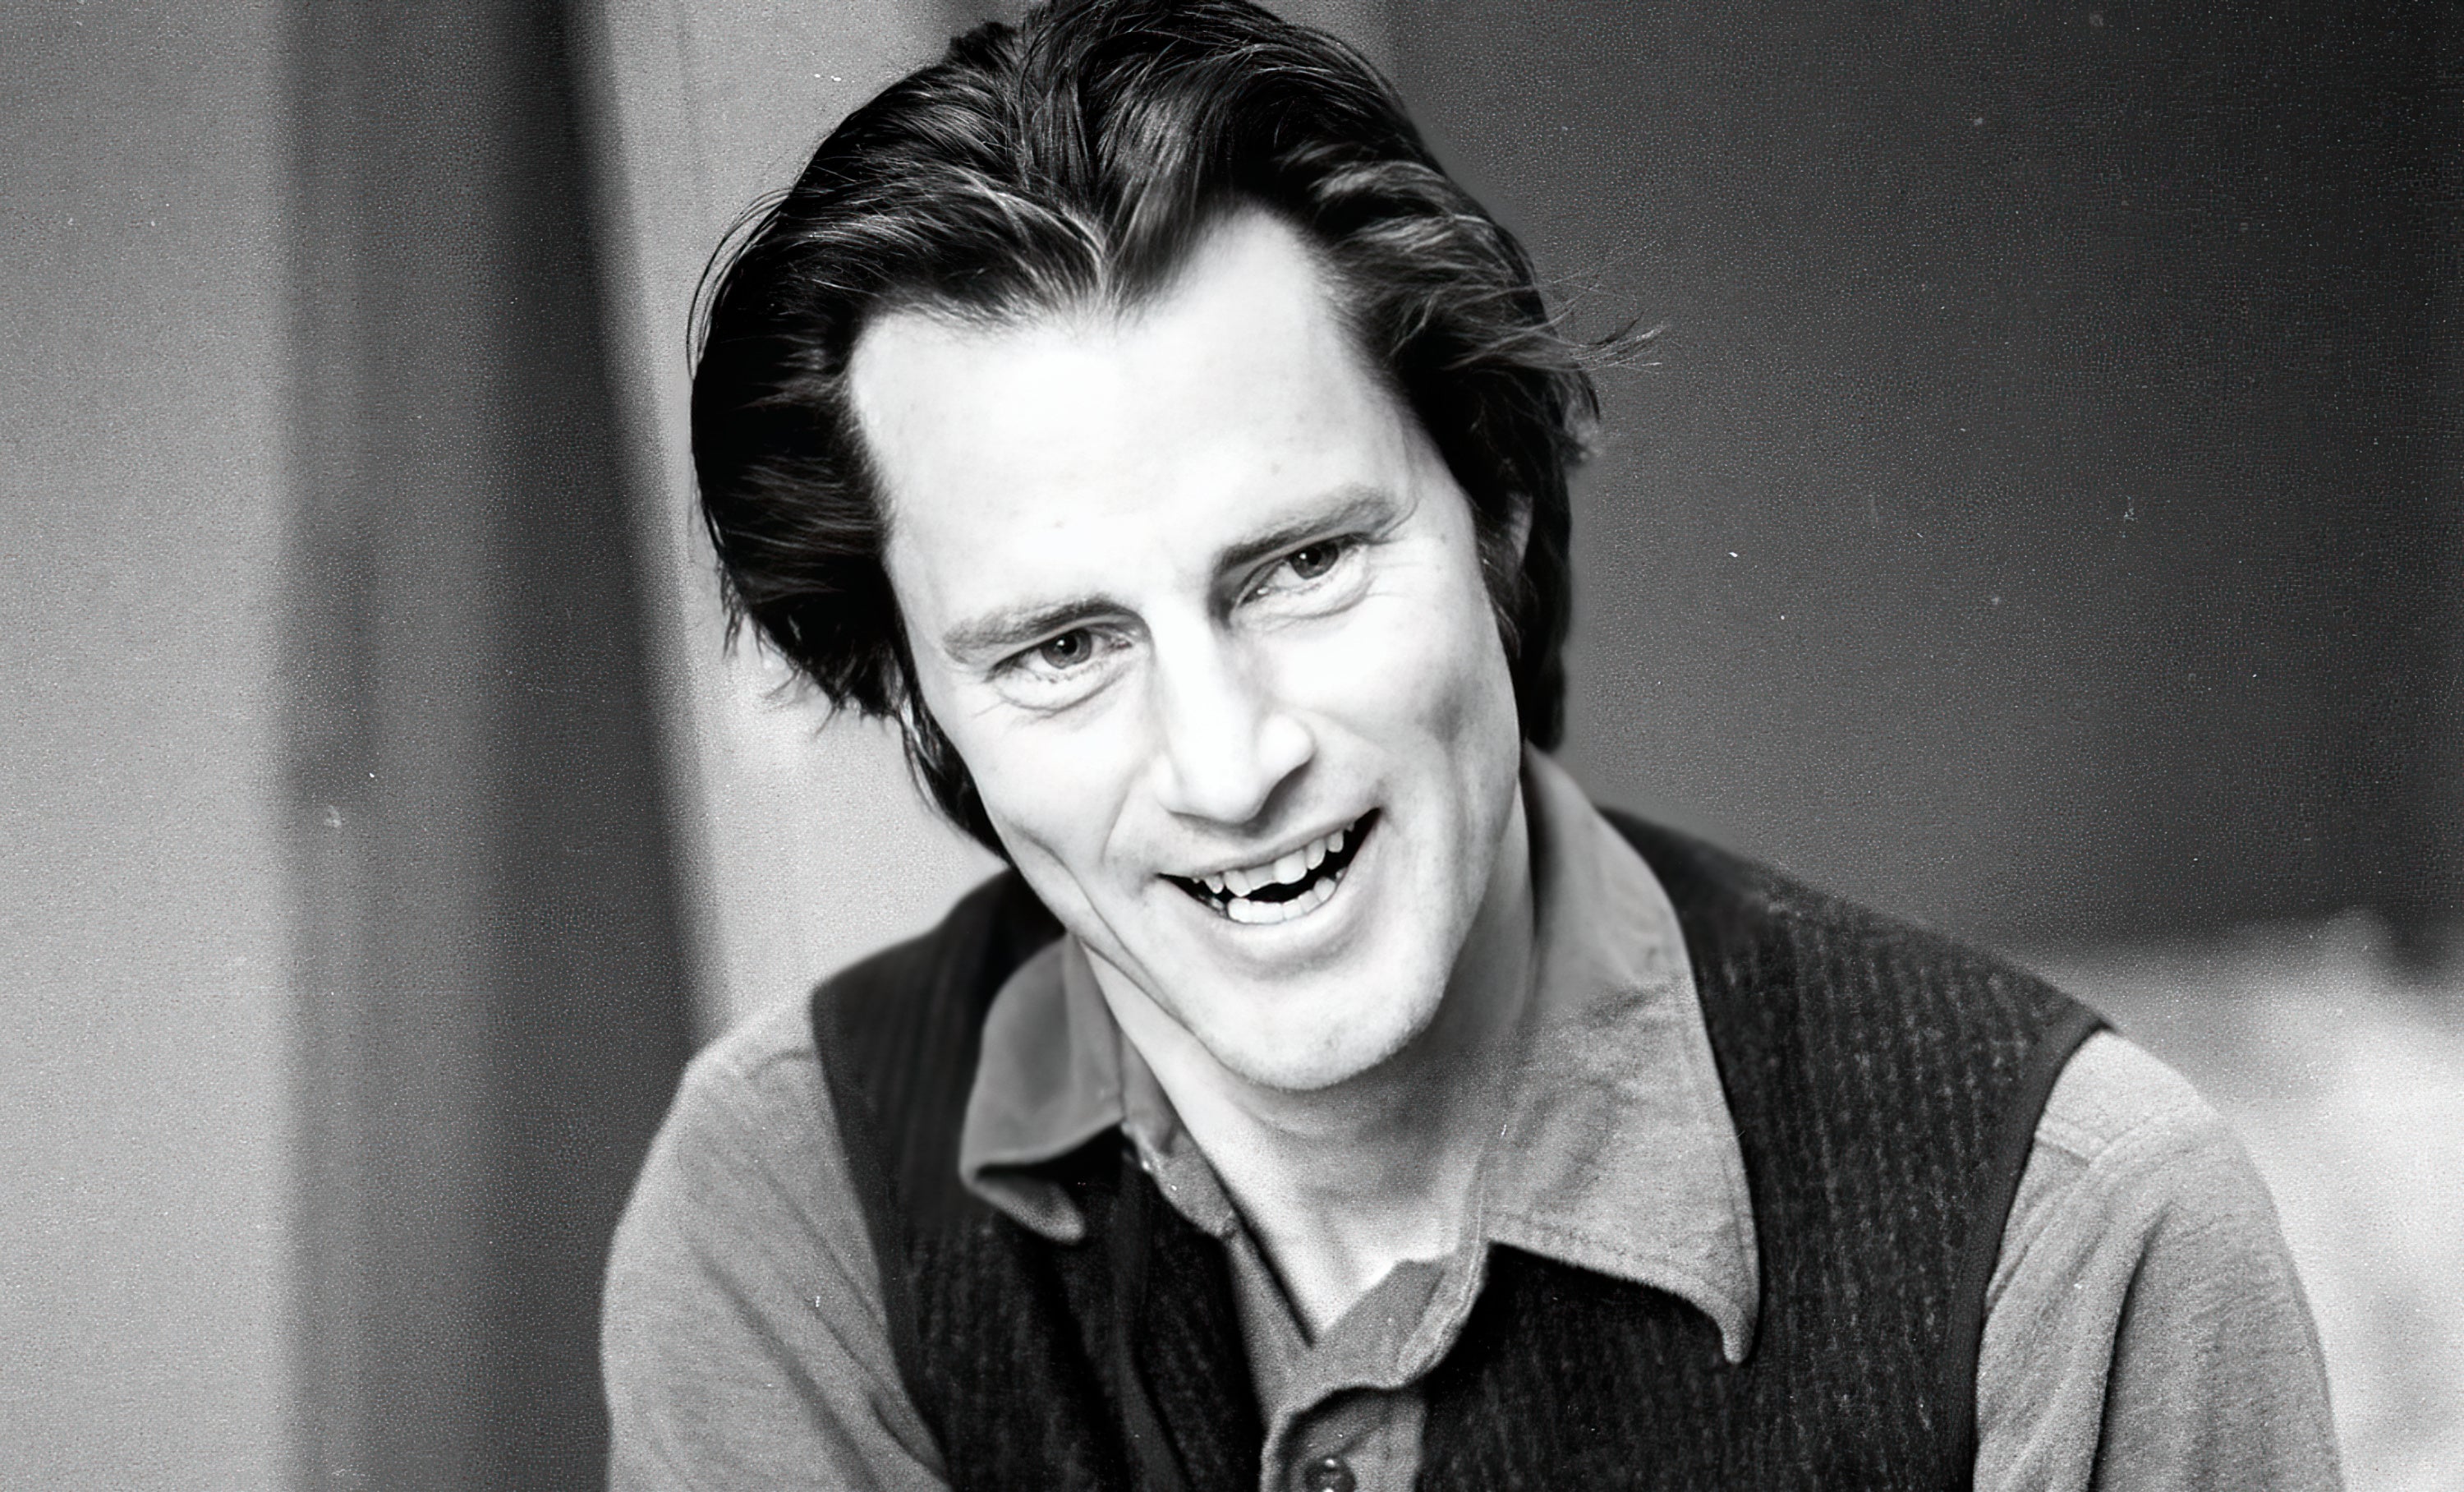 True West: Sam Shepard's Life, Work, and Times - Book Review - Image of Actor Sam Shepard